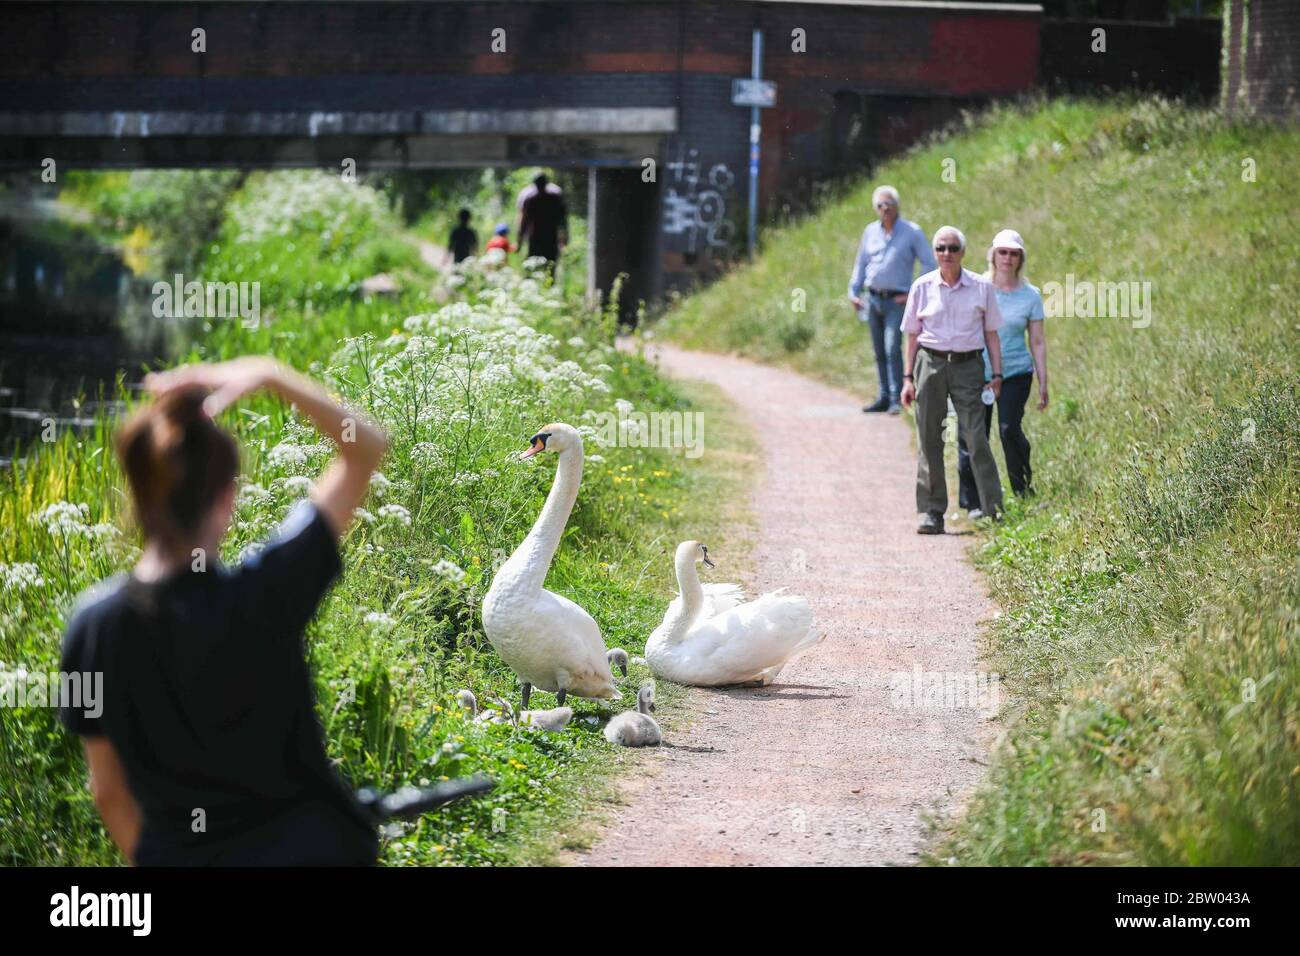 Neath, Wales, UK. 28th May 2020. A pair of Swans and their cygnets have become a big hit with locals during the lockdown period, in Neath, South Wales. The Swans have made their home along the Neath Canal in town, carefully looking after their youngsters along the bank in the fine Summer weather, just don't get too close! Pictured are people taking a wide birth as they pass the birds in the calan path.  Robert Melen/Alamy Live News. Stock Photo